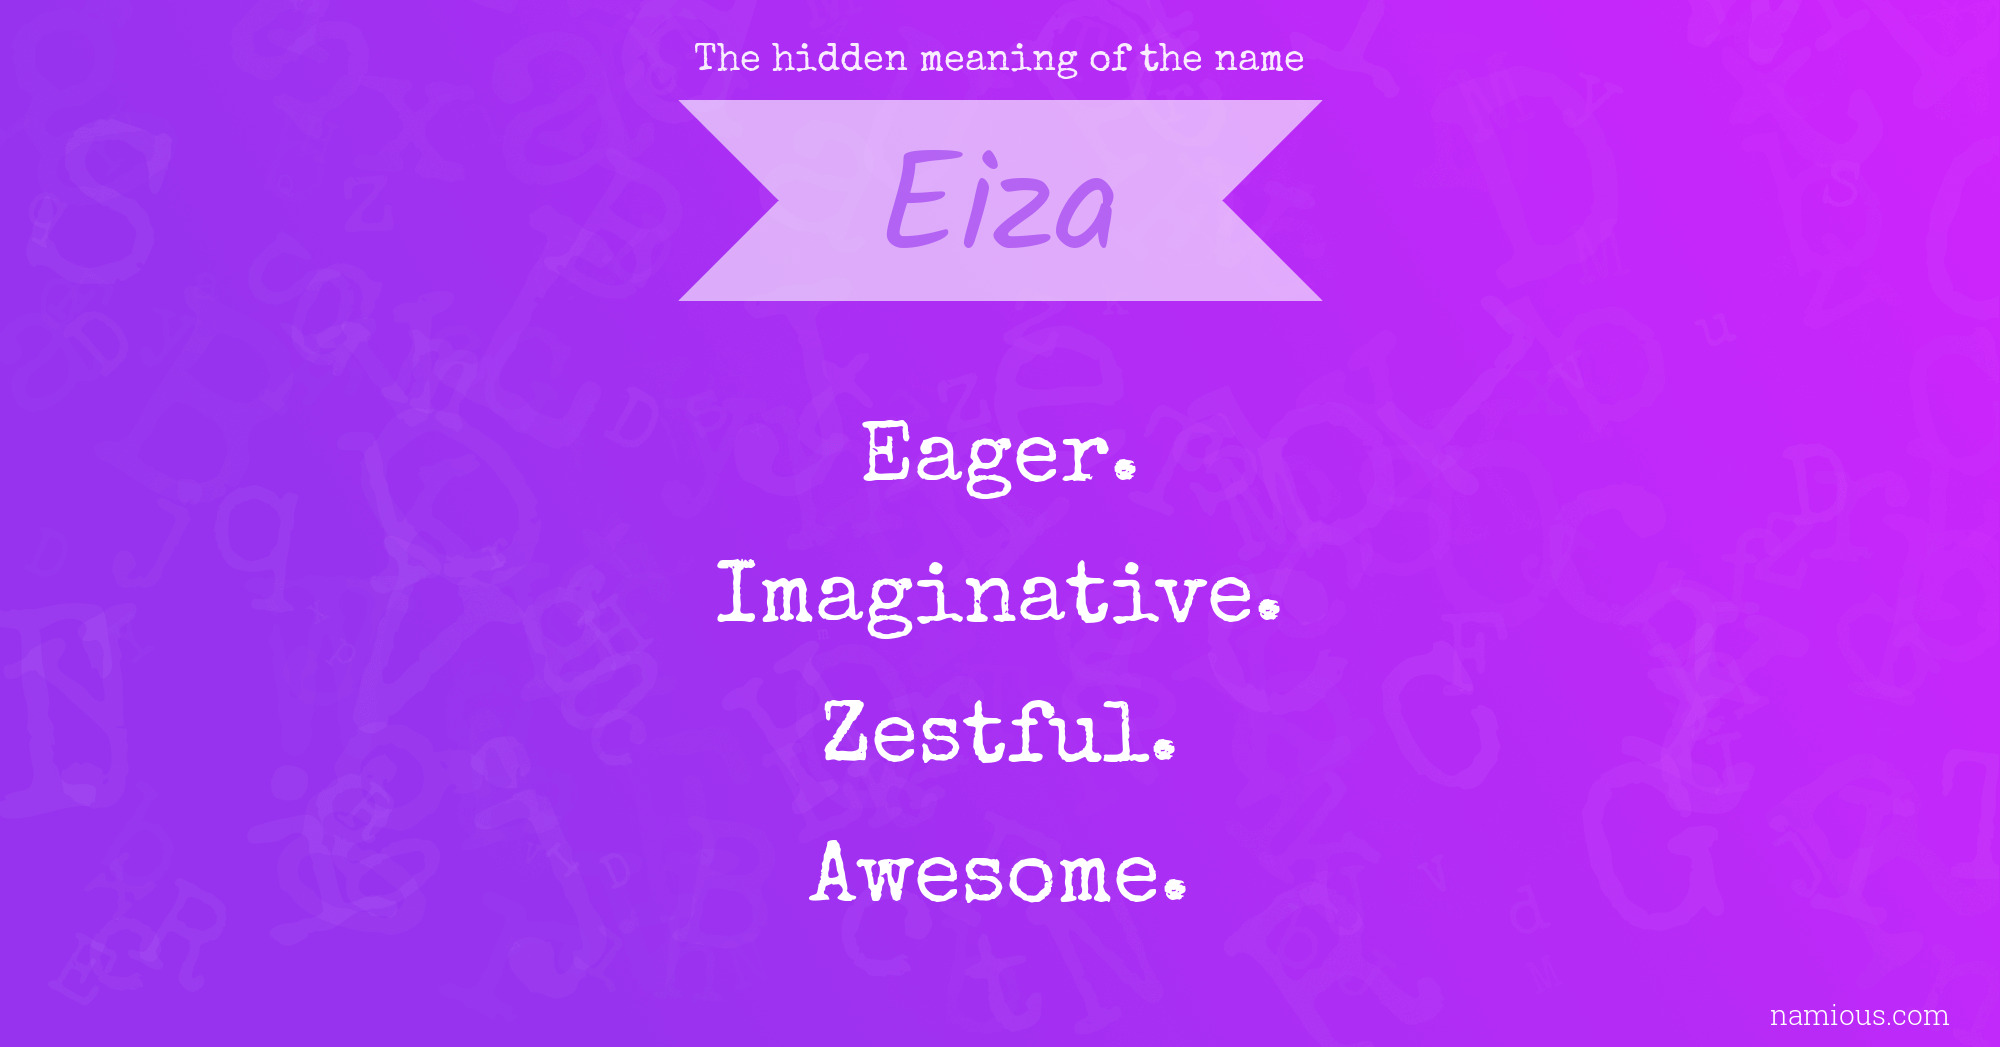 The hidden meaning of the name Eiza